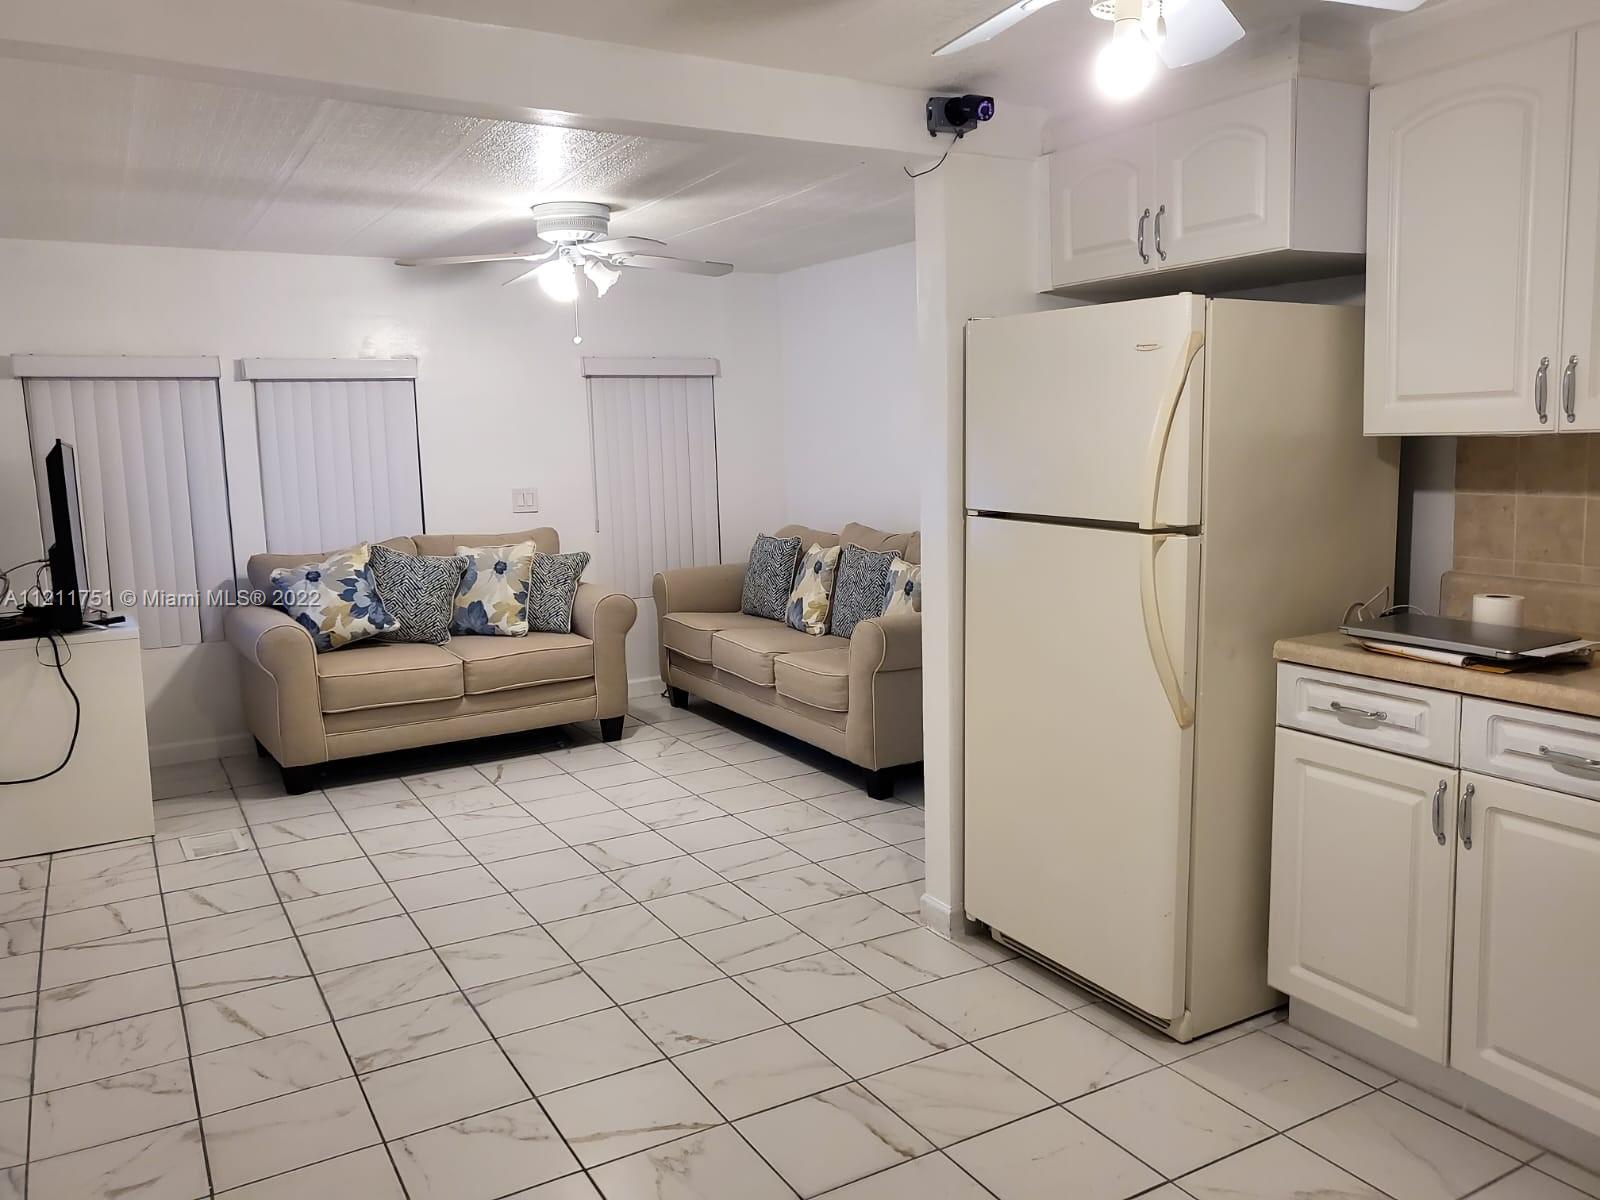 Double size Mobile home  located in central area close to Coral Gables 2 full bedrooms 2 baths with ceramic floor, central air conditioning, remodel very clean is like living in a house. large laundry rom with washer and dryer .

please call agent for showing FRIDAY only 7864094111